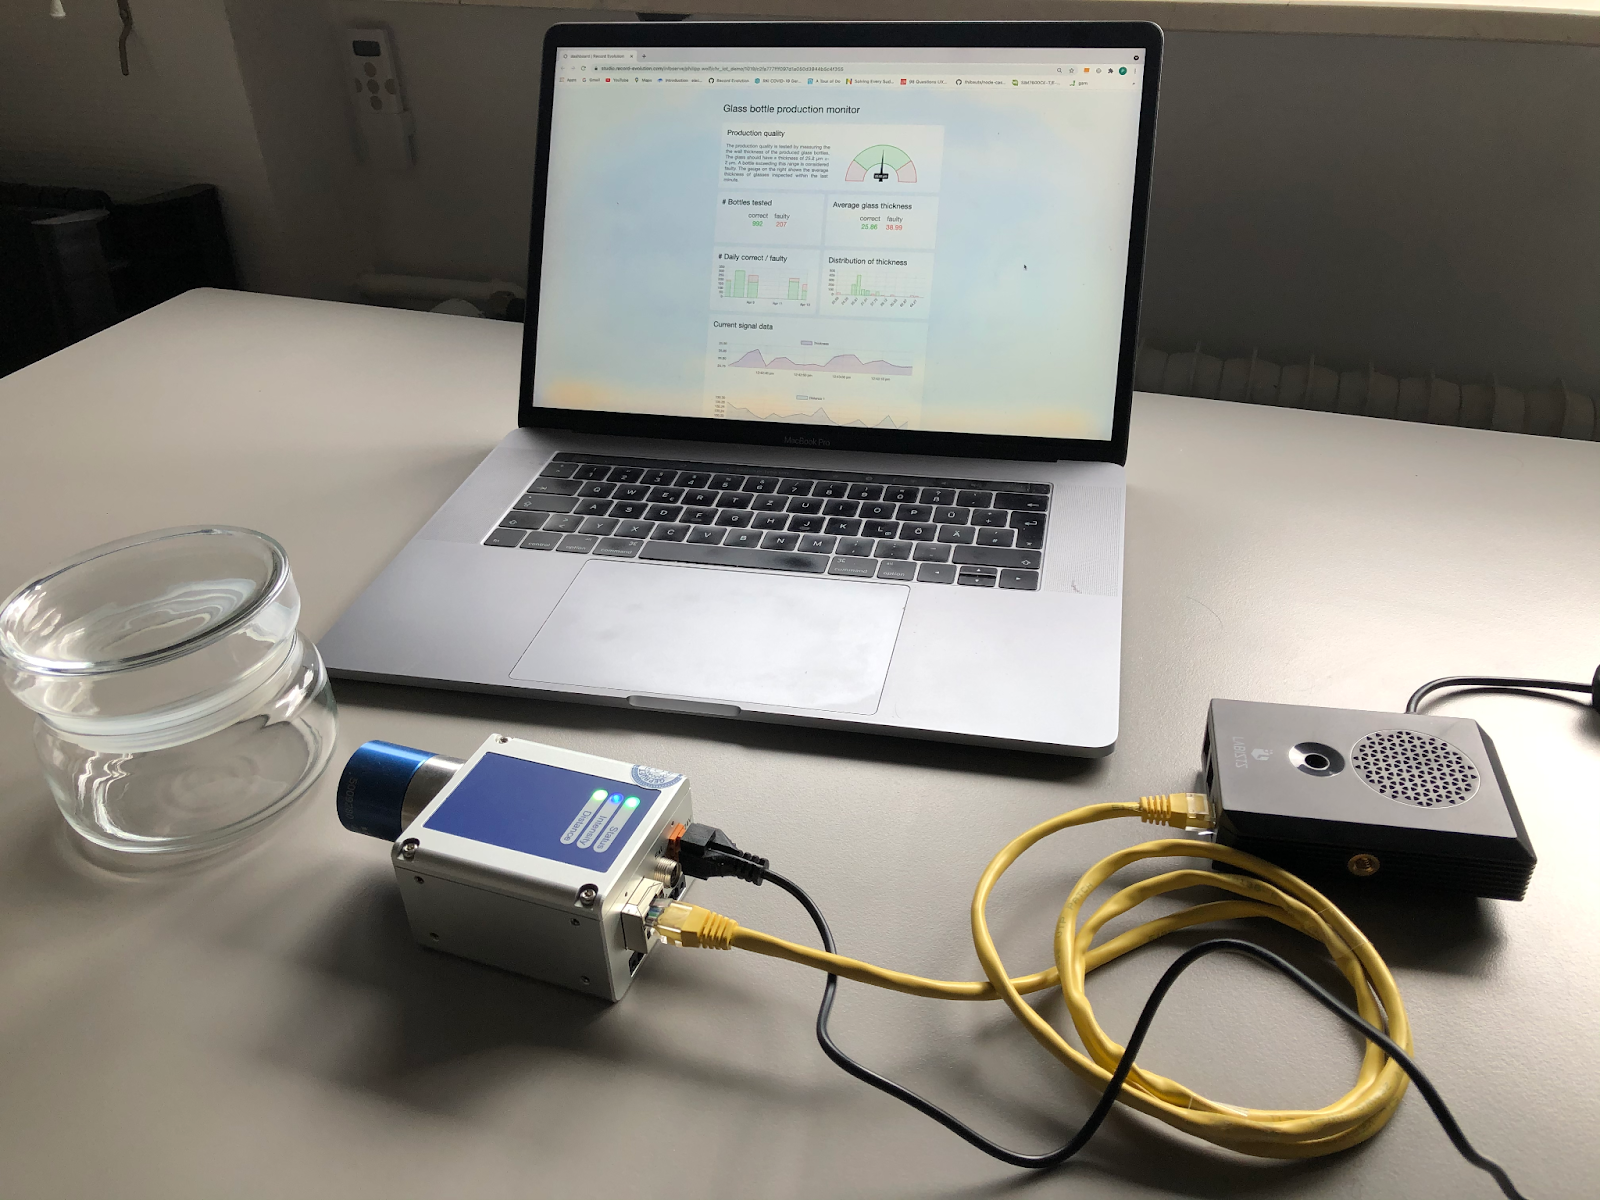 the initial setup for extracting IoT sensor data